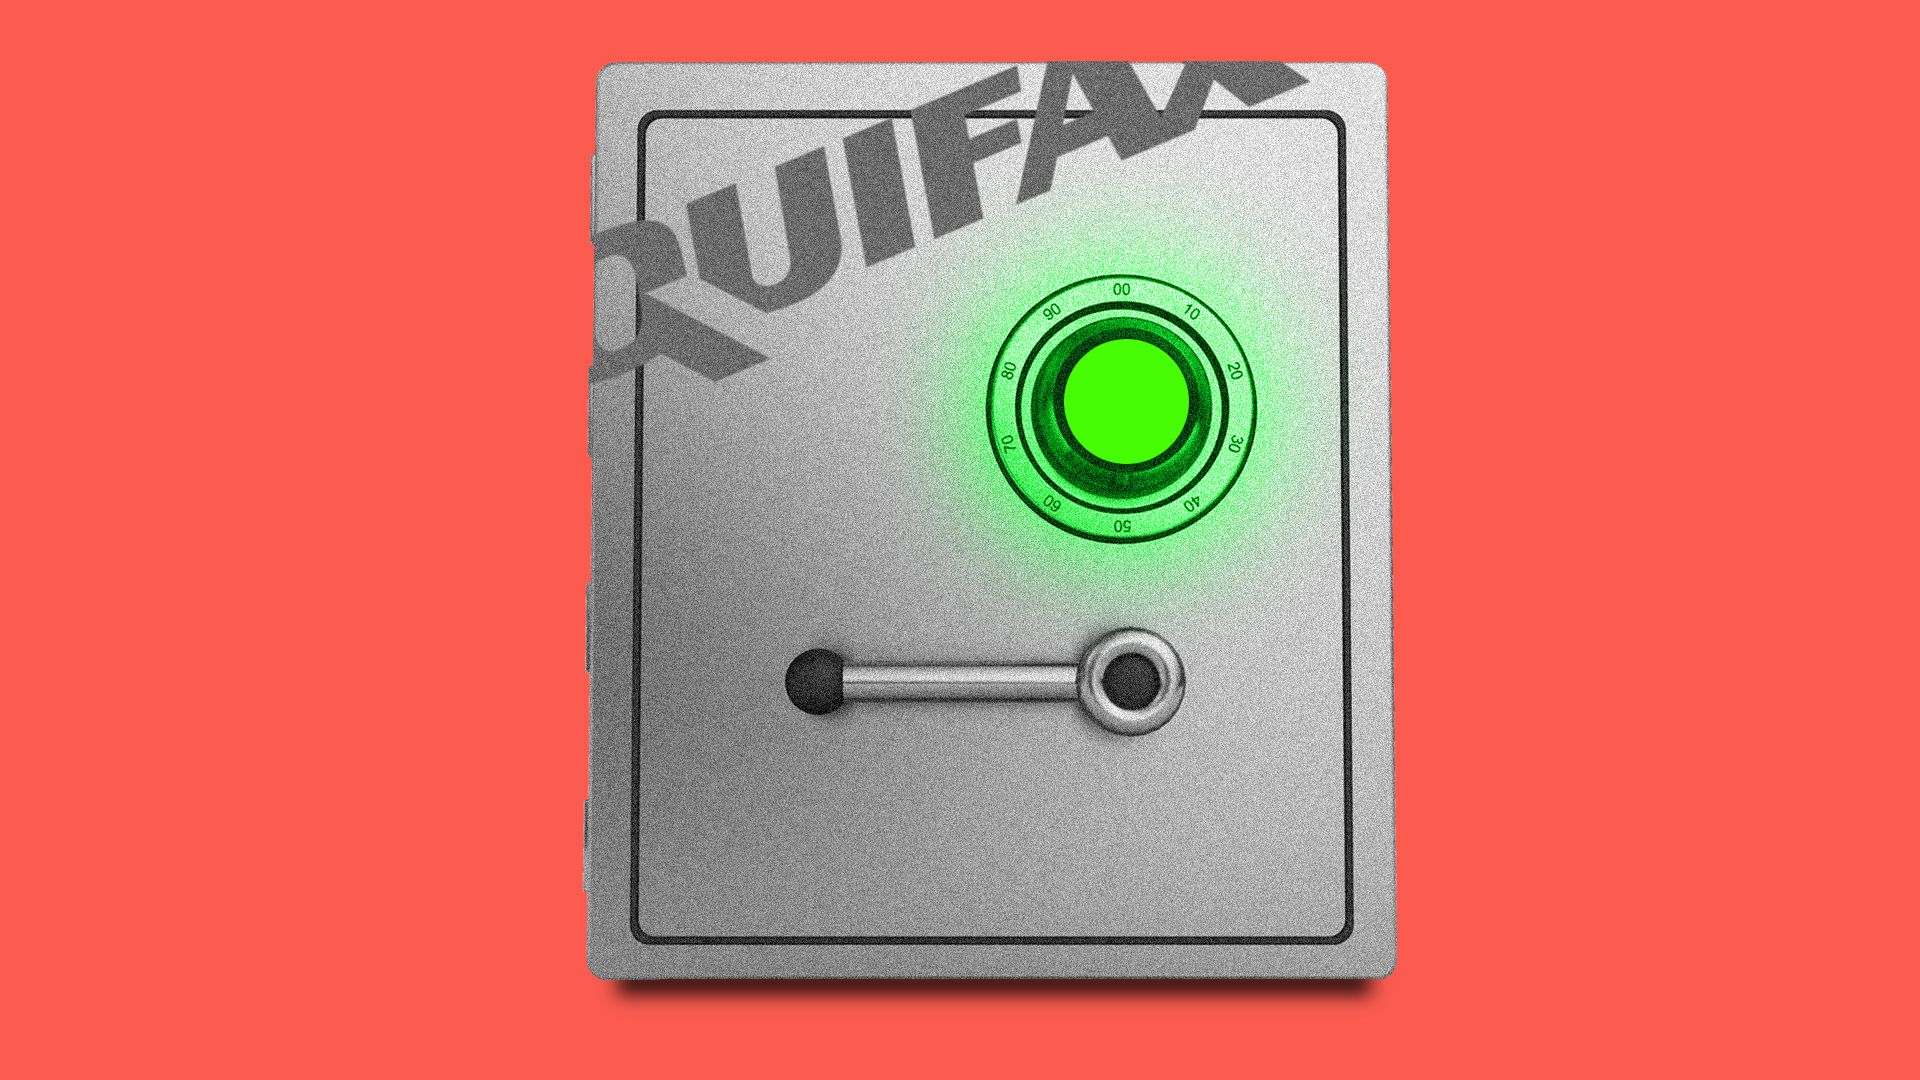 This illustration shows a safe with the Equifax logo on it.